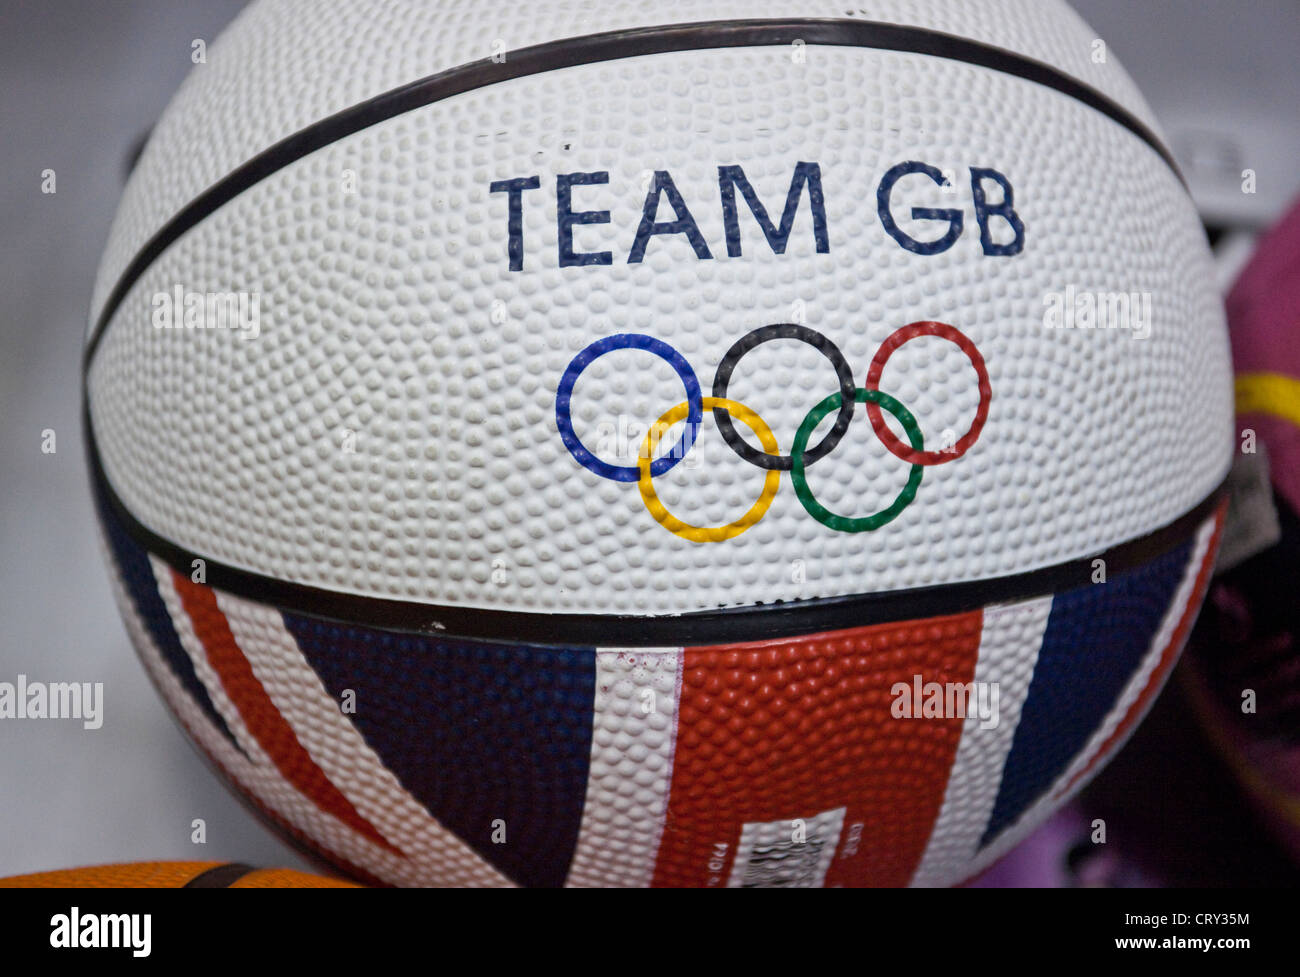 Team GB with Olympic rings on a basketball, London, England, UK Stock Photo